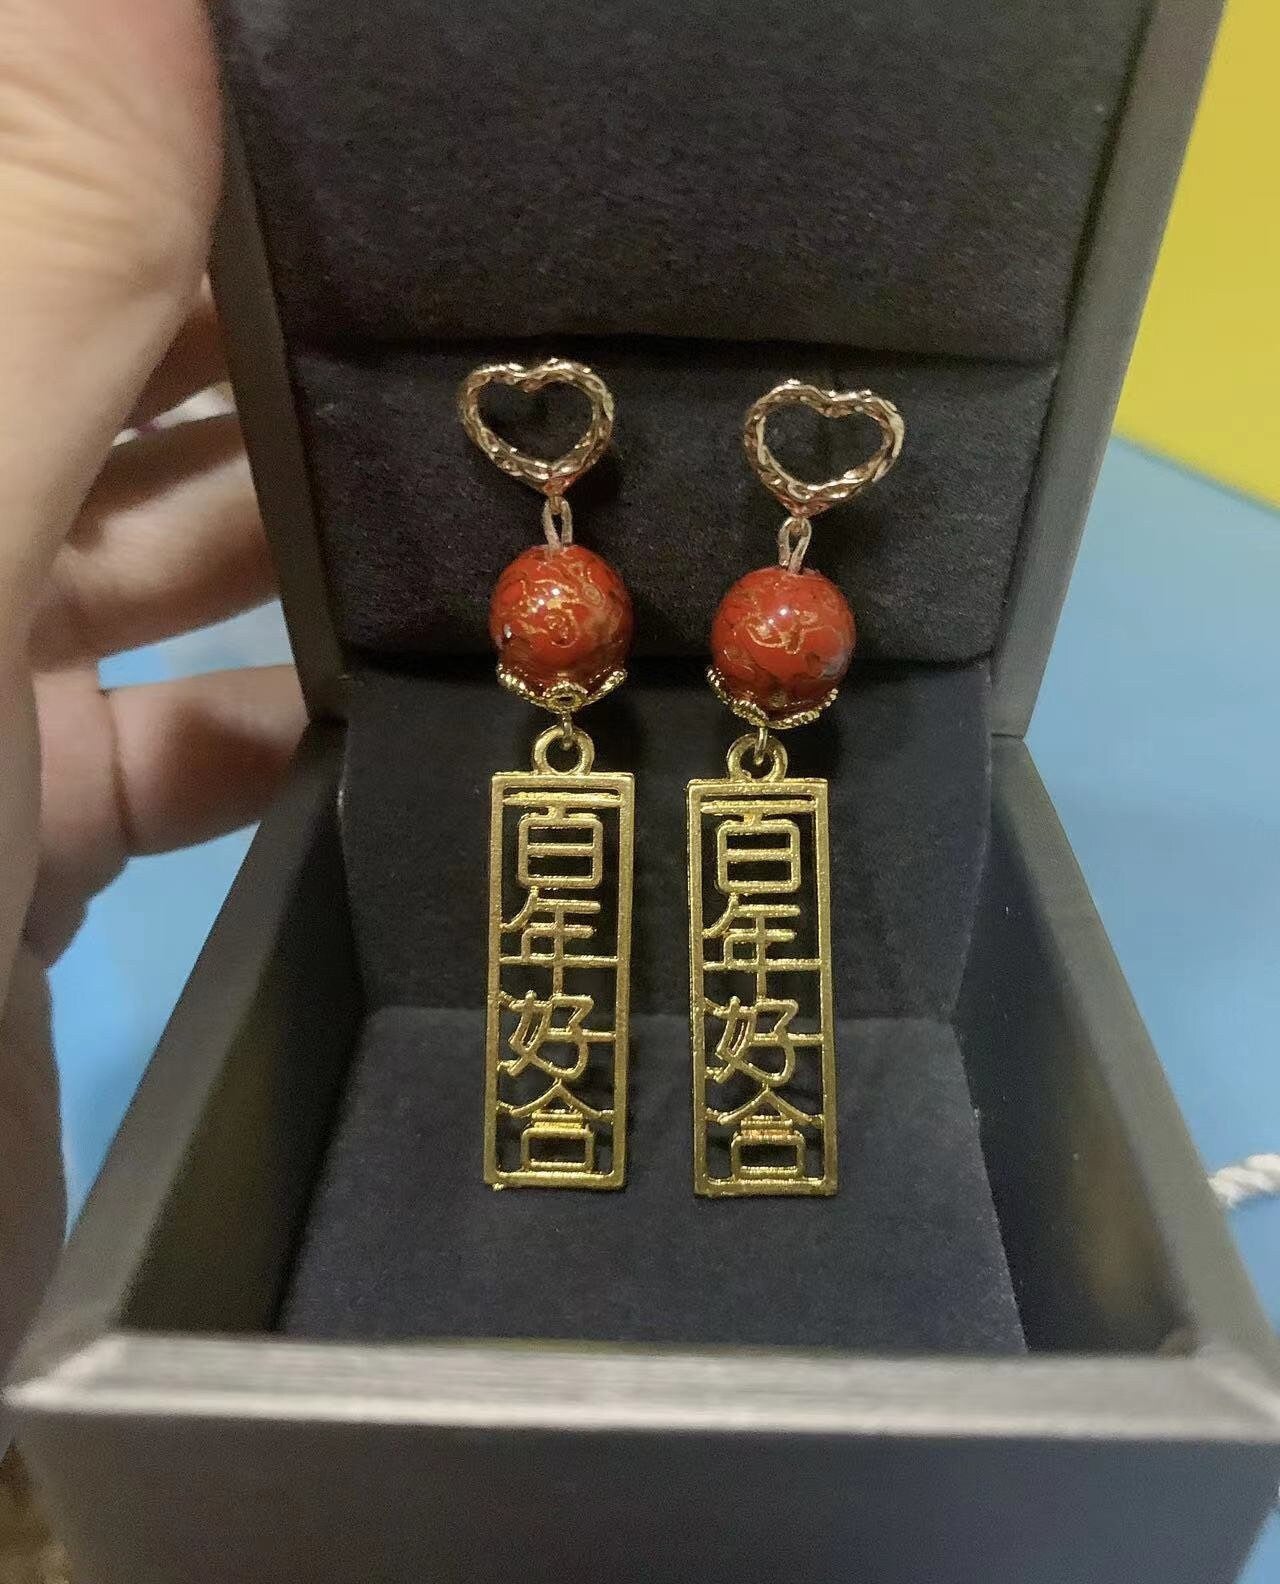 Jewelry/Lacquer earrings "LOVE FOR 100 YEARS"/lucky red ball